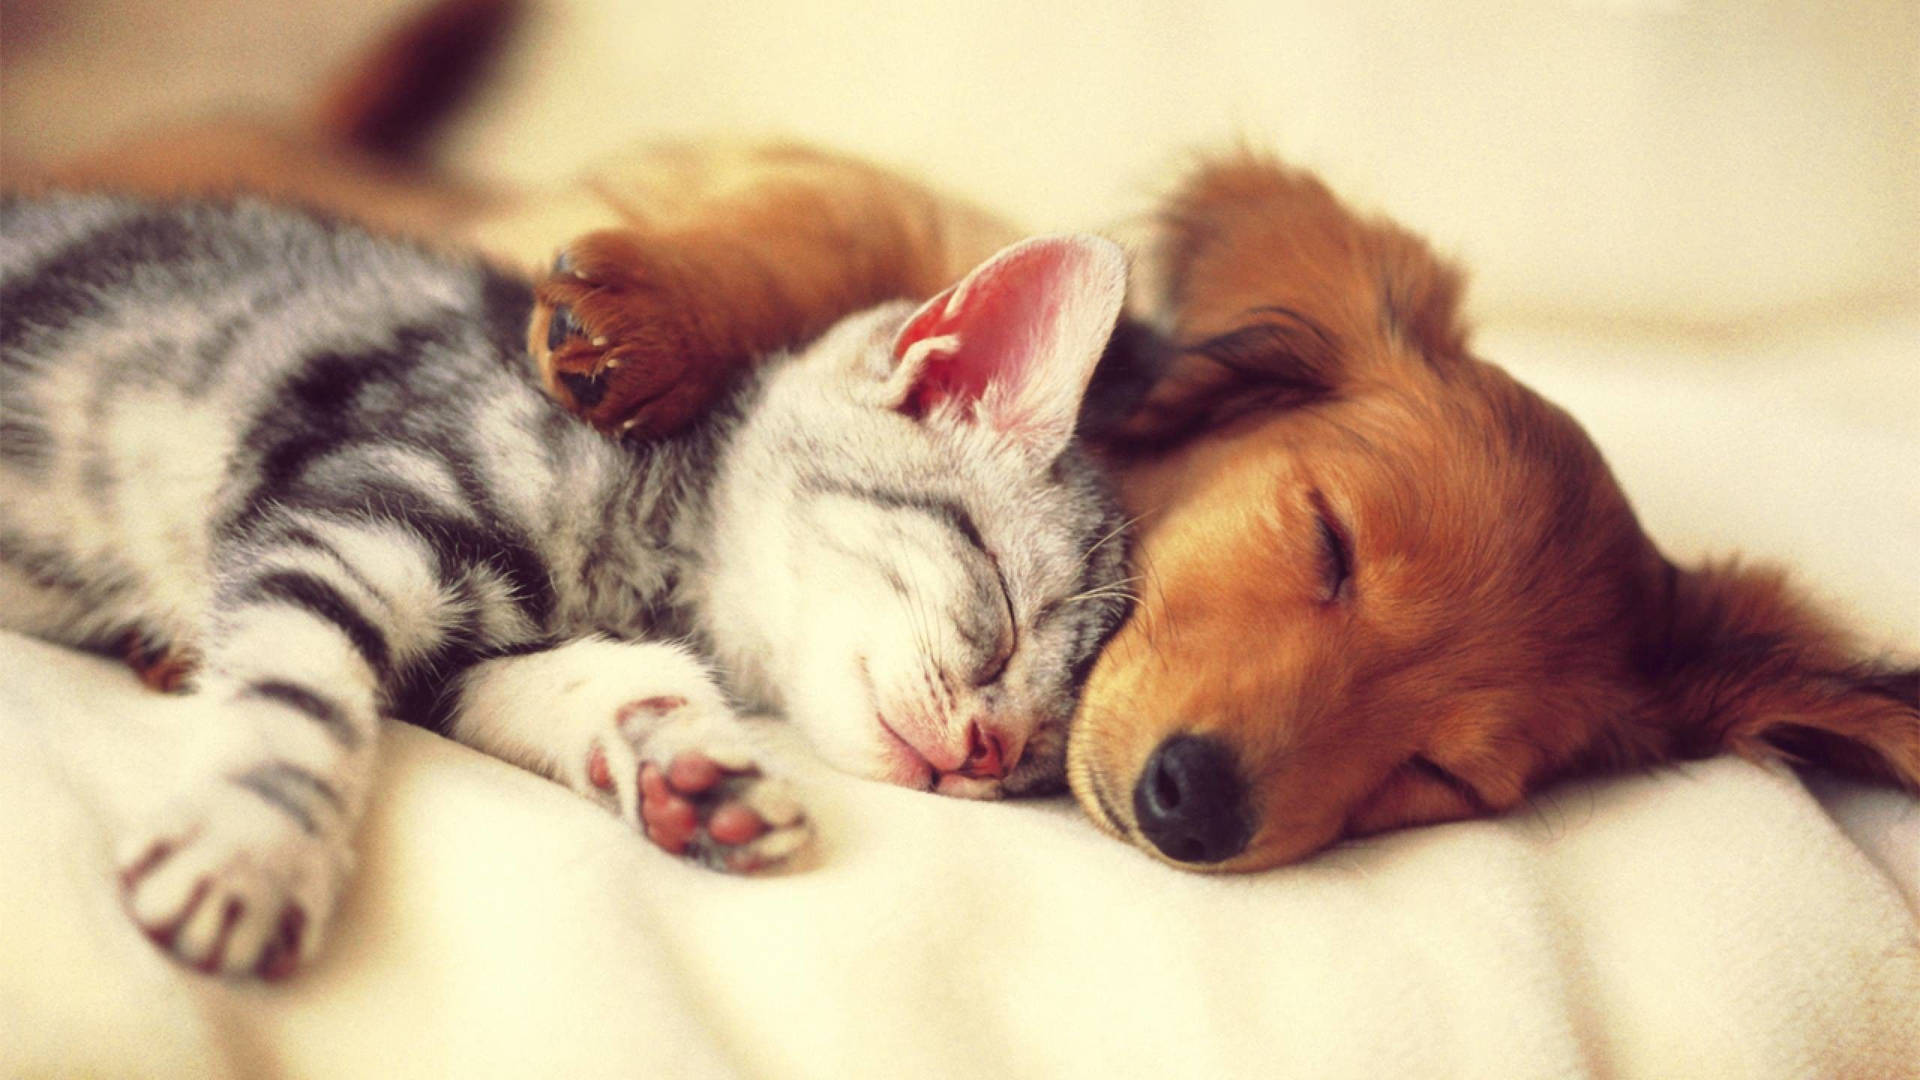 A Peaceful Slumber: Cat and Dog Sleeping Together Wallpaper